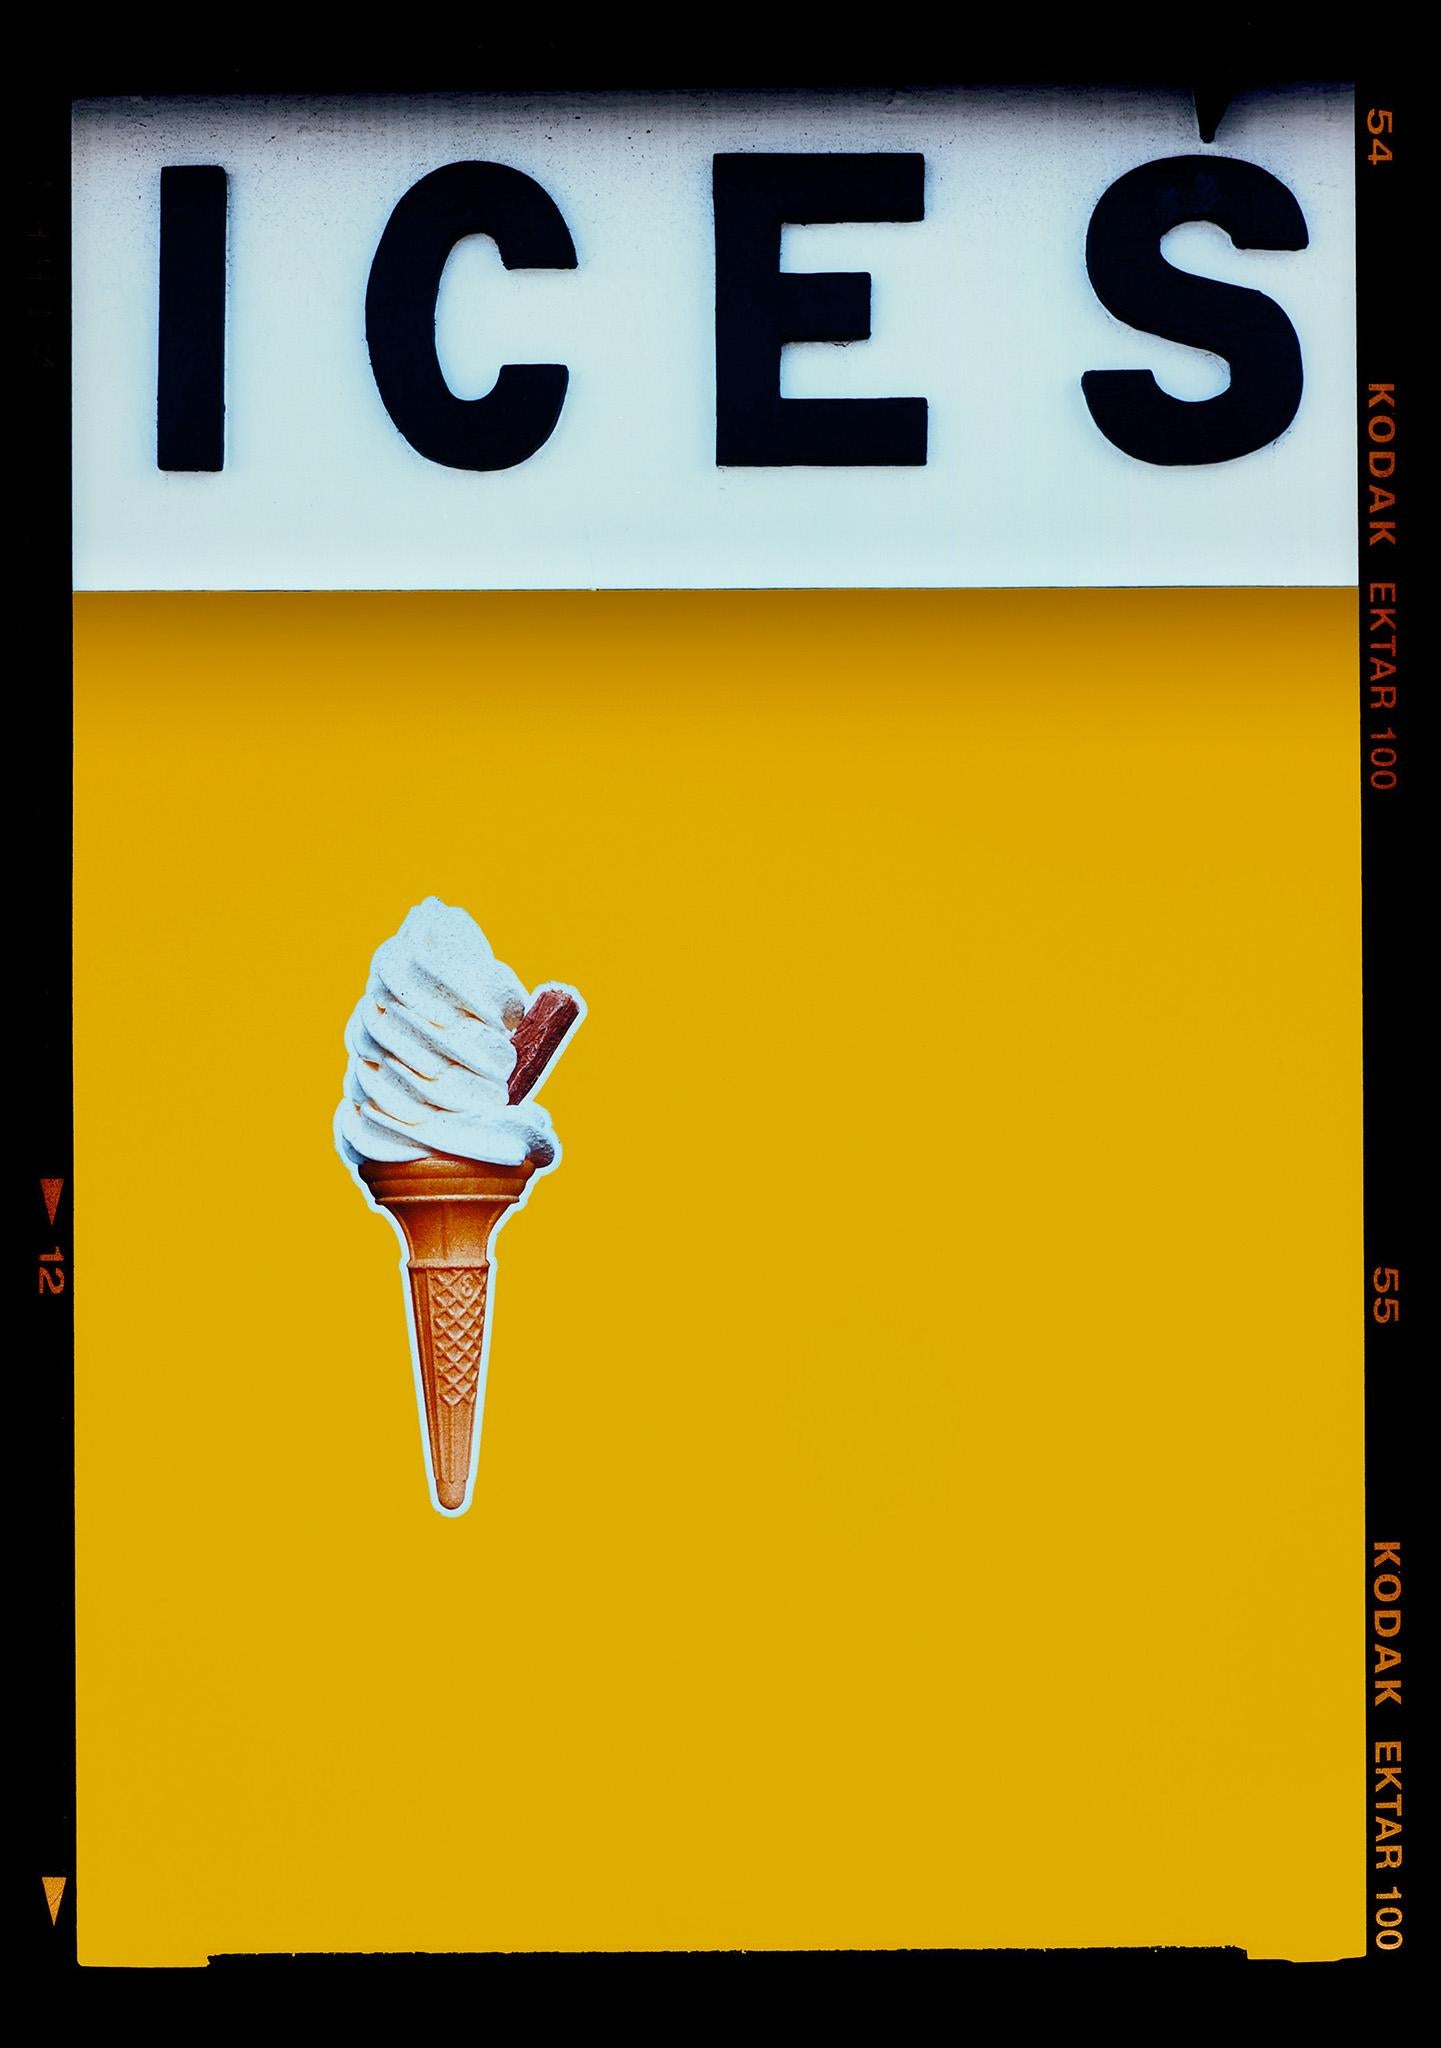 Ices (Mustard Yellow), Bexhill-on-Sea - British seaside color photography